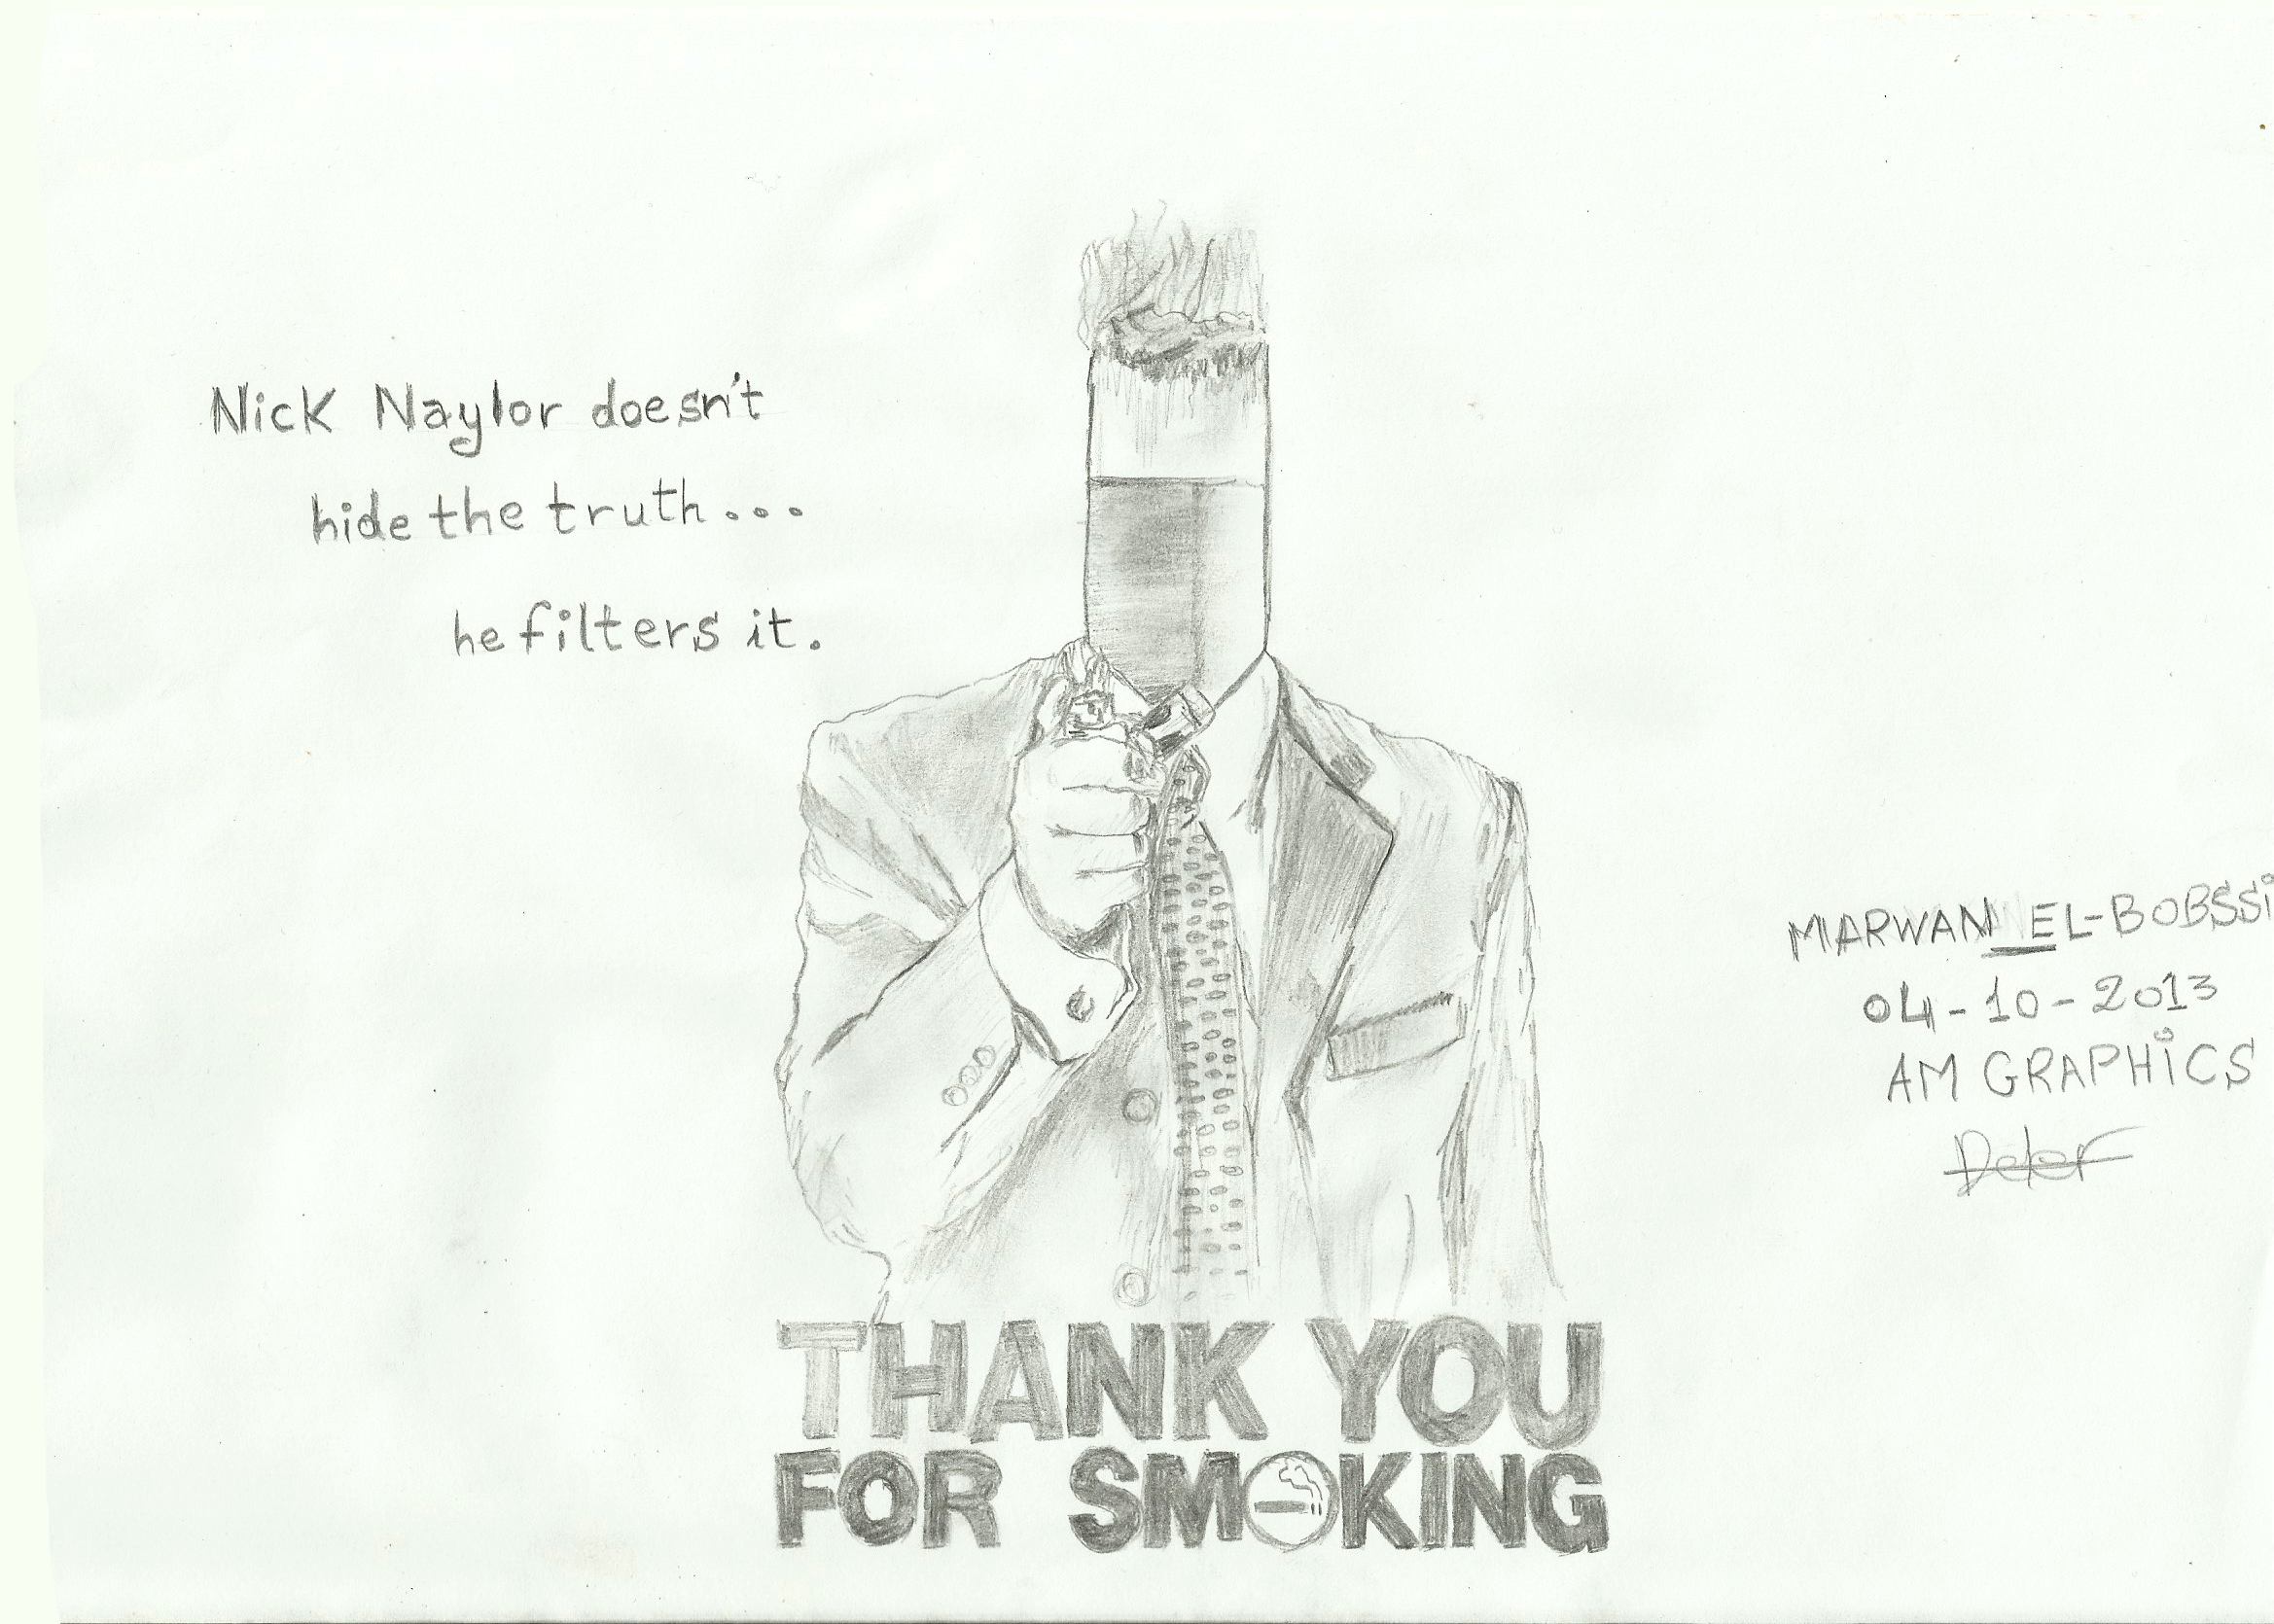 Thank you for smoking